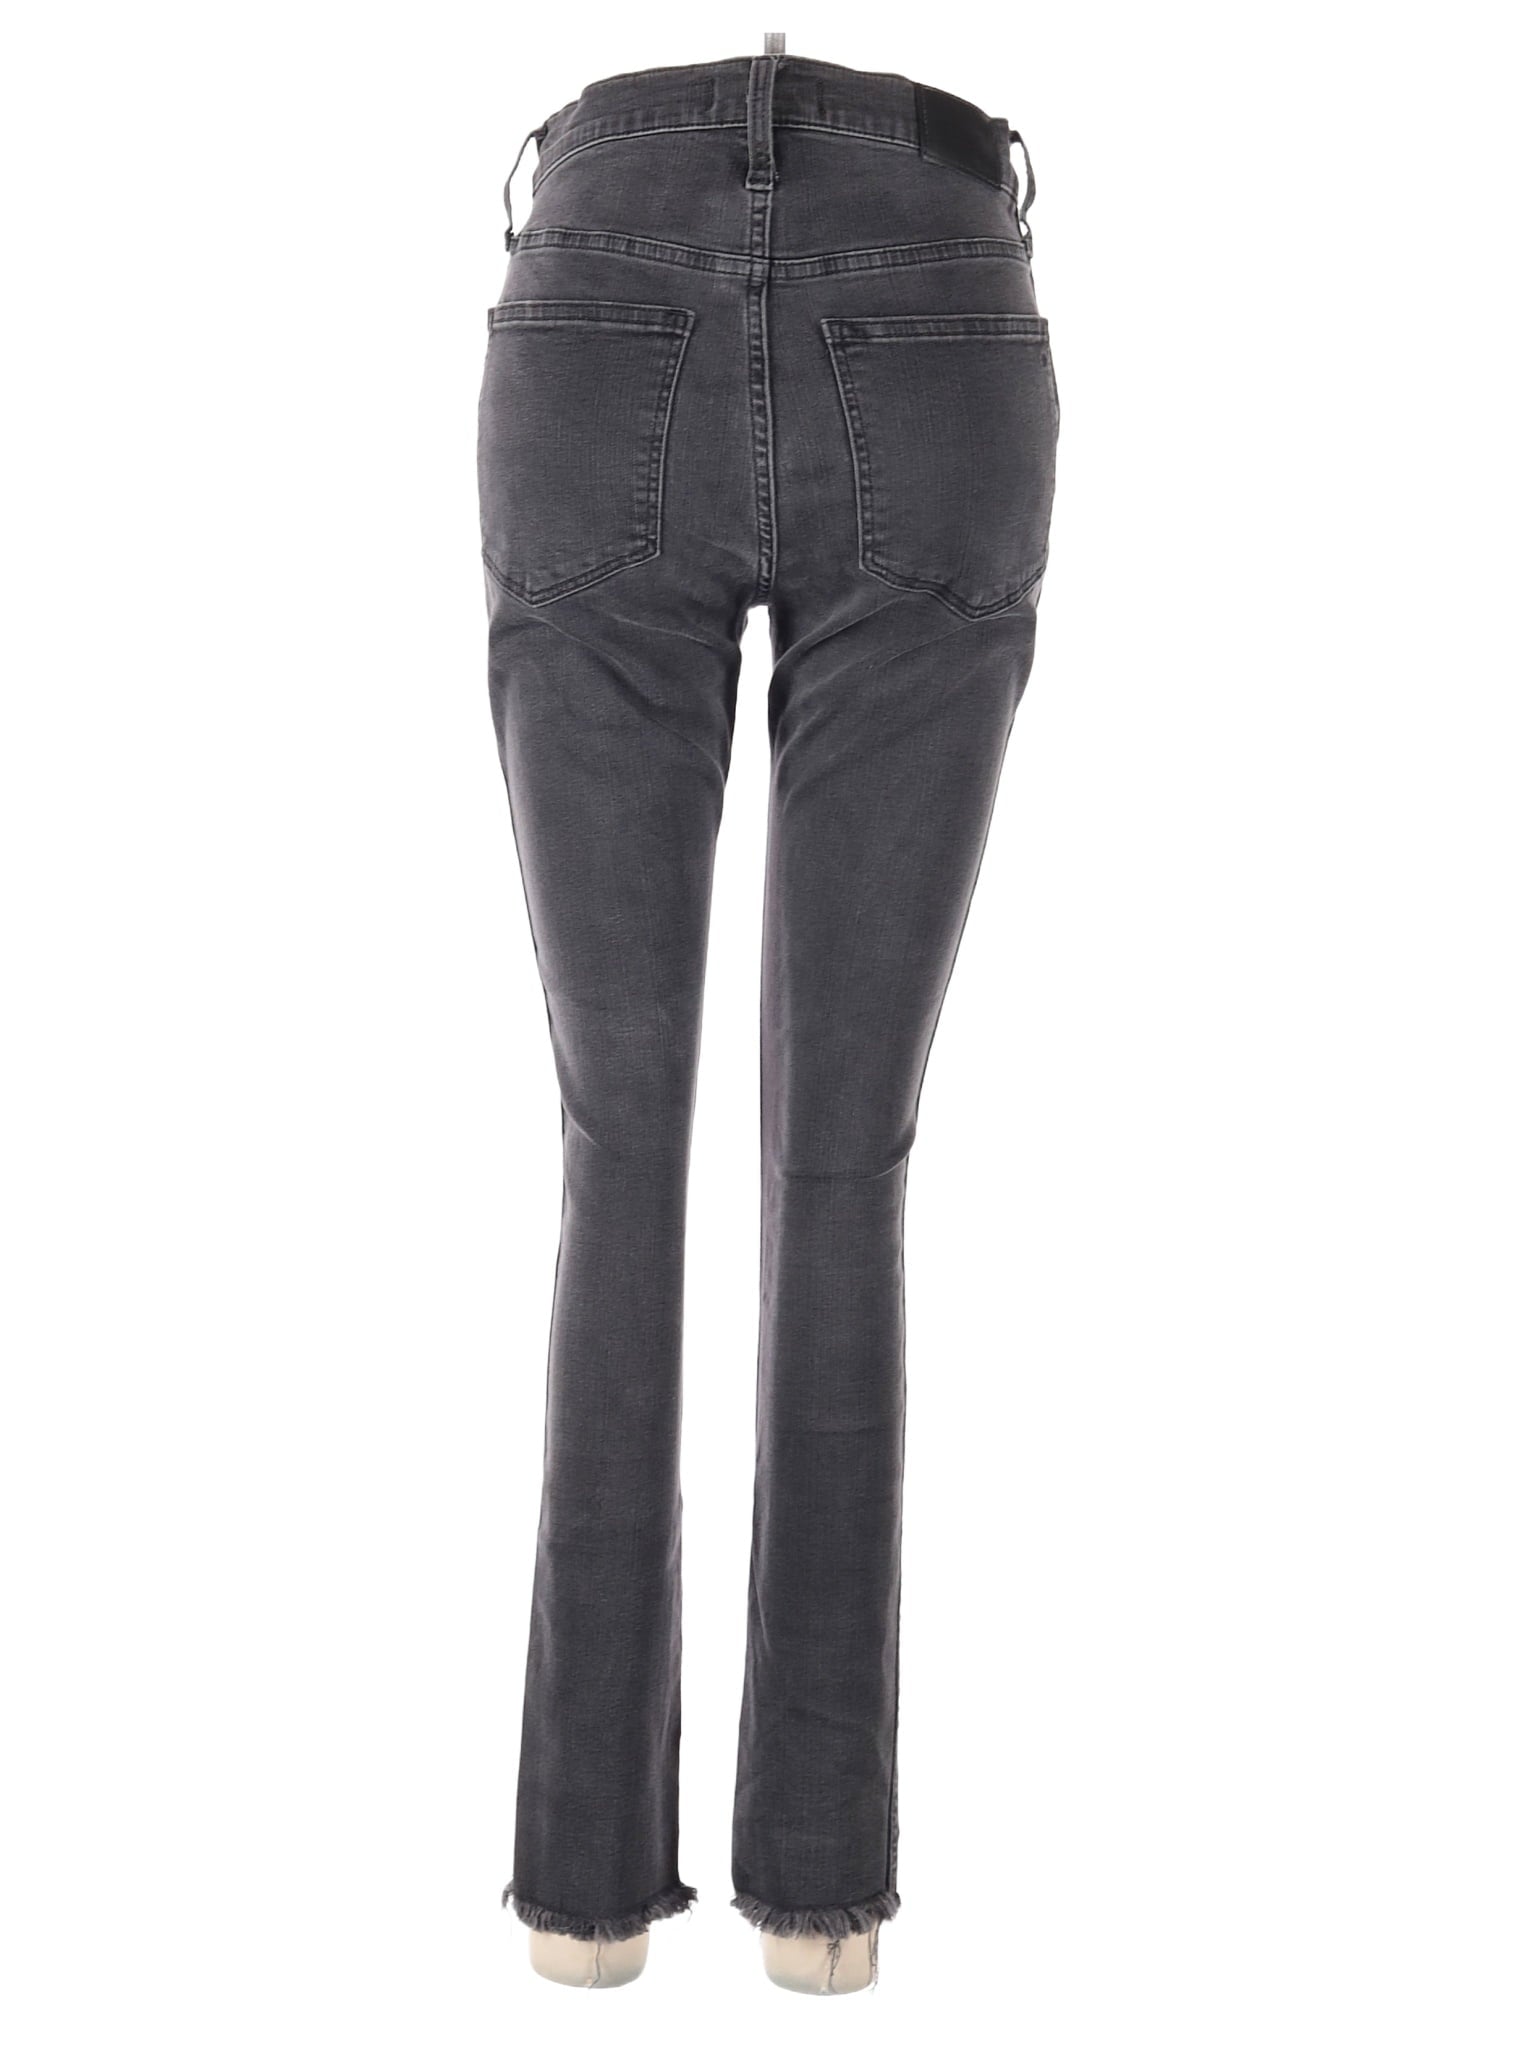 High-Rise Skinny 10" High-Rise Skinny Jeans In Berkeley Black: Button-Through Edition in Dark Wash waist size - 27